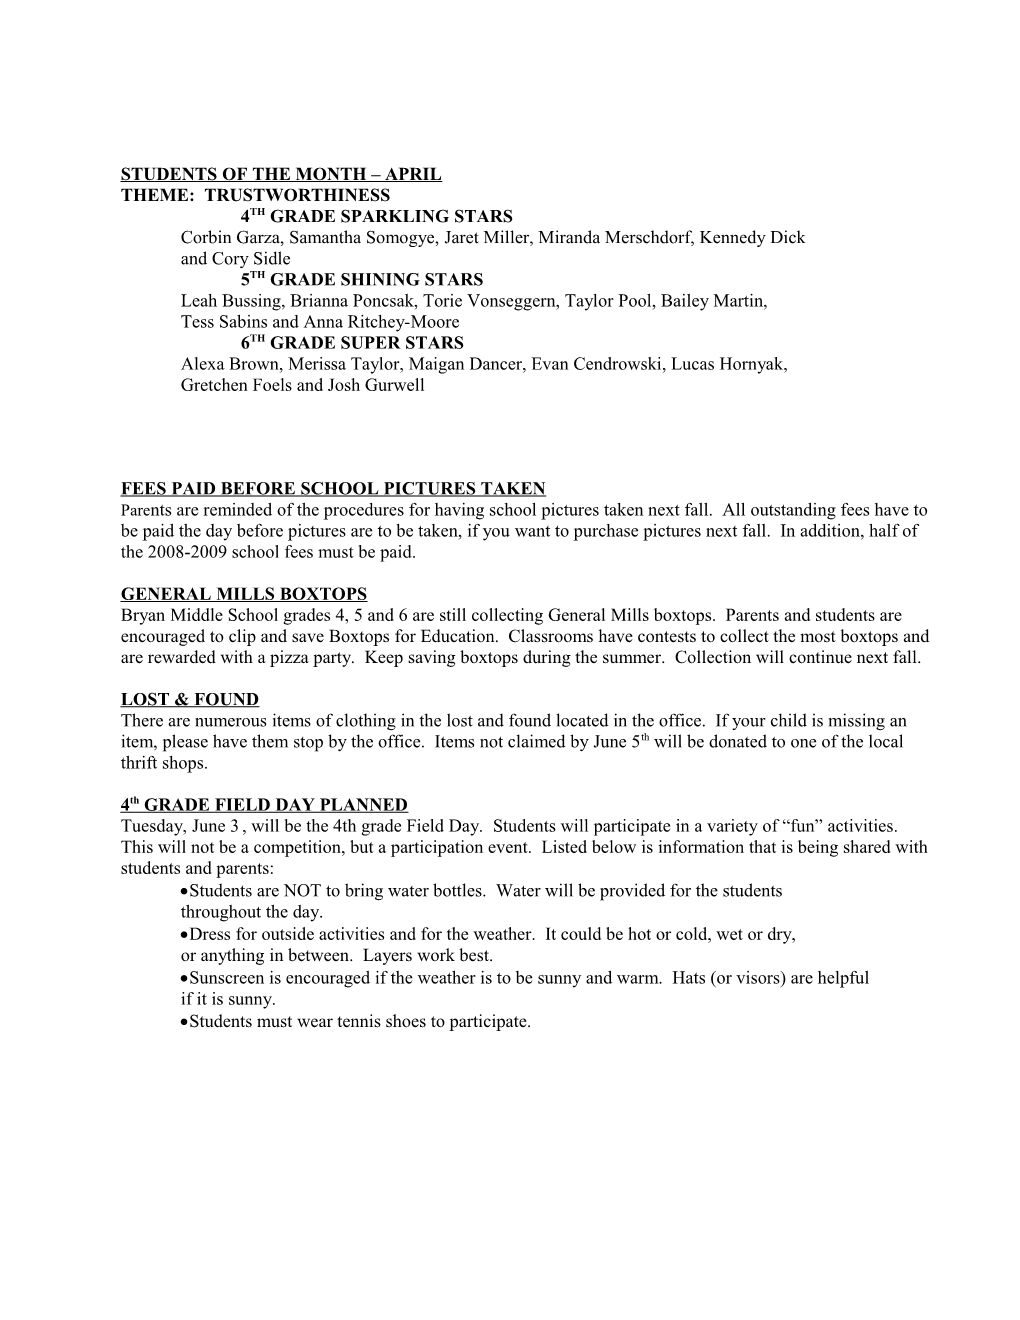 No. 5 GRADES 4, 5 and 6 NEWSLETTER May 23, 2008